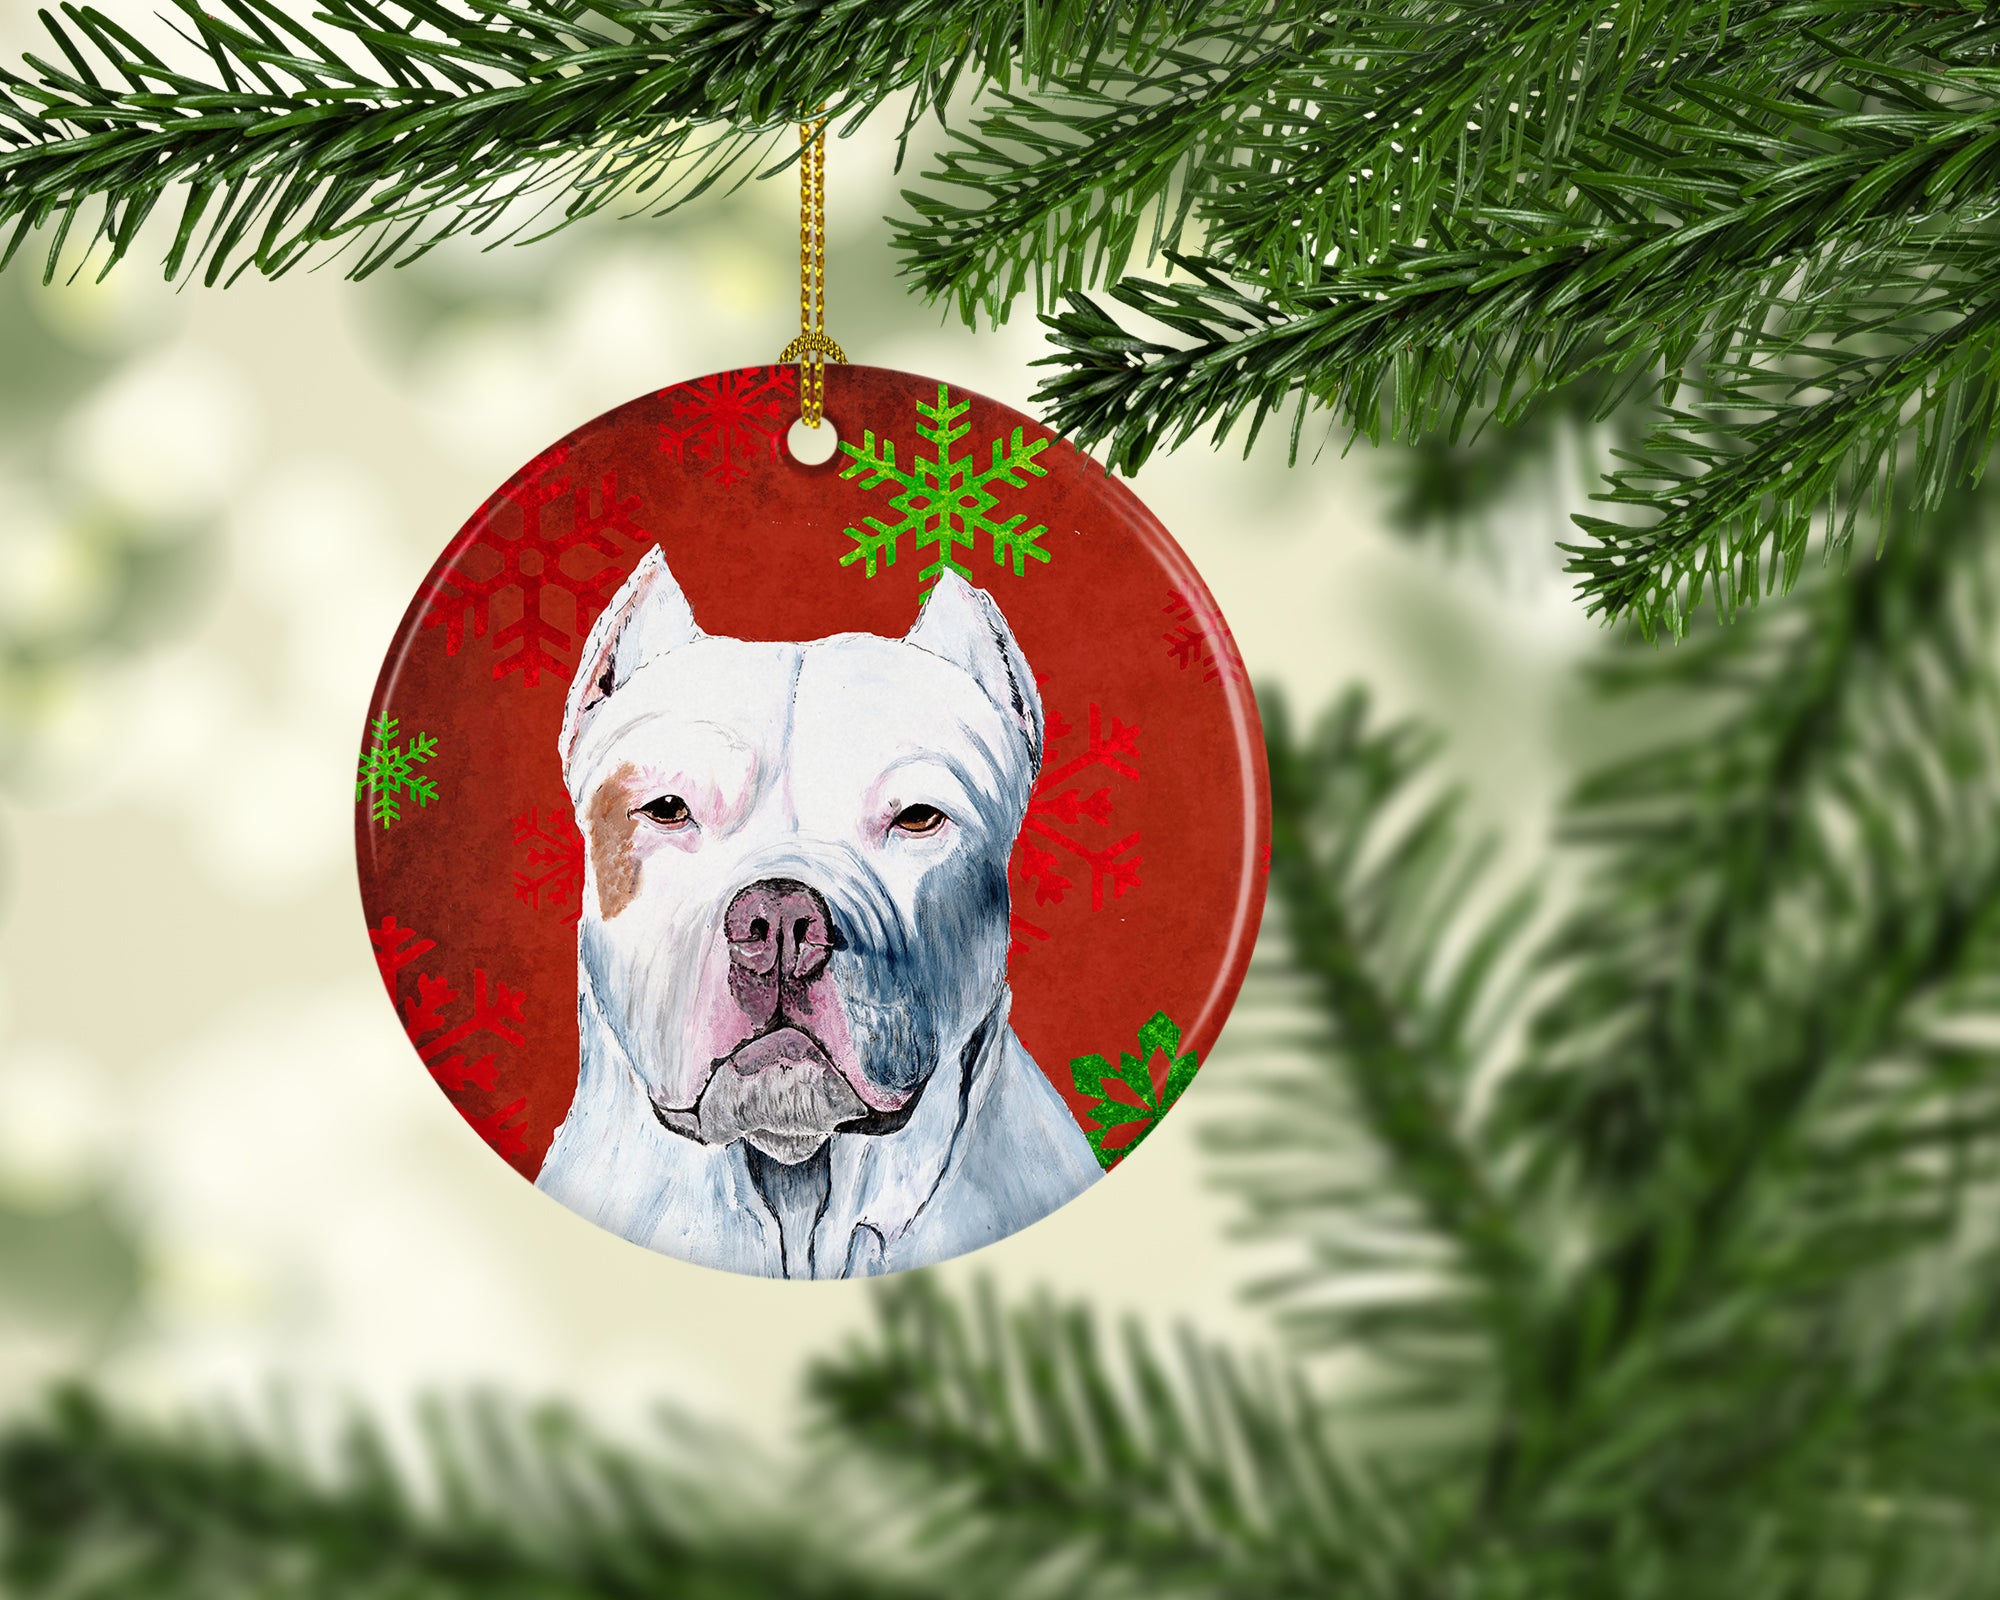 Pit Bull Red Snowflakes Holiday Christmas Ceramic Ornament SC9421 - the-store.com